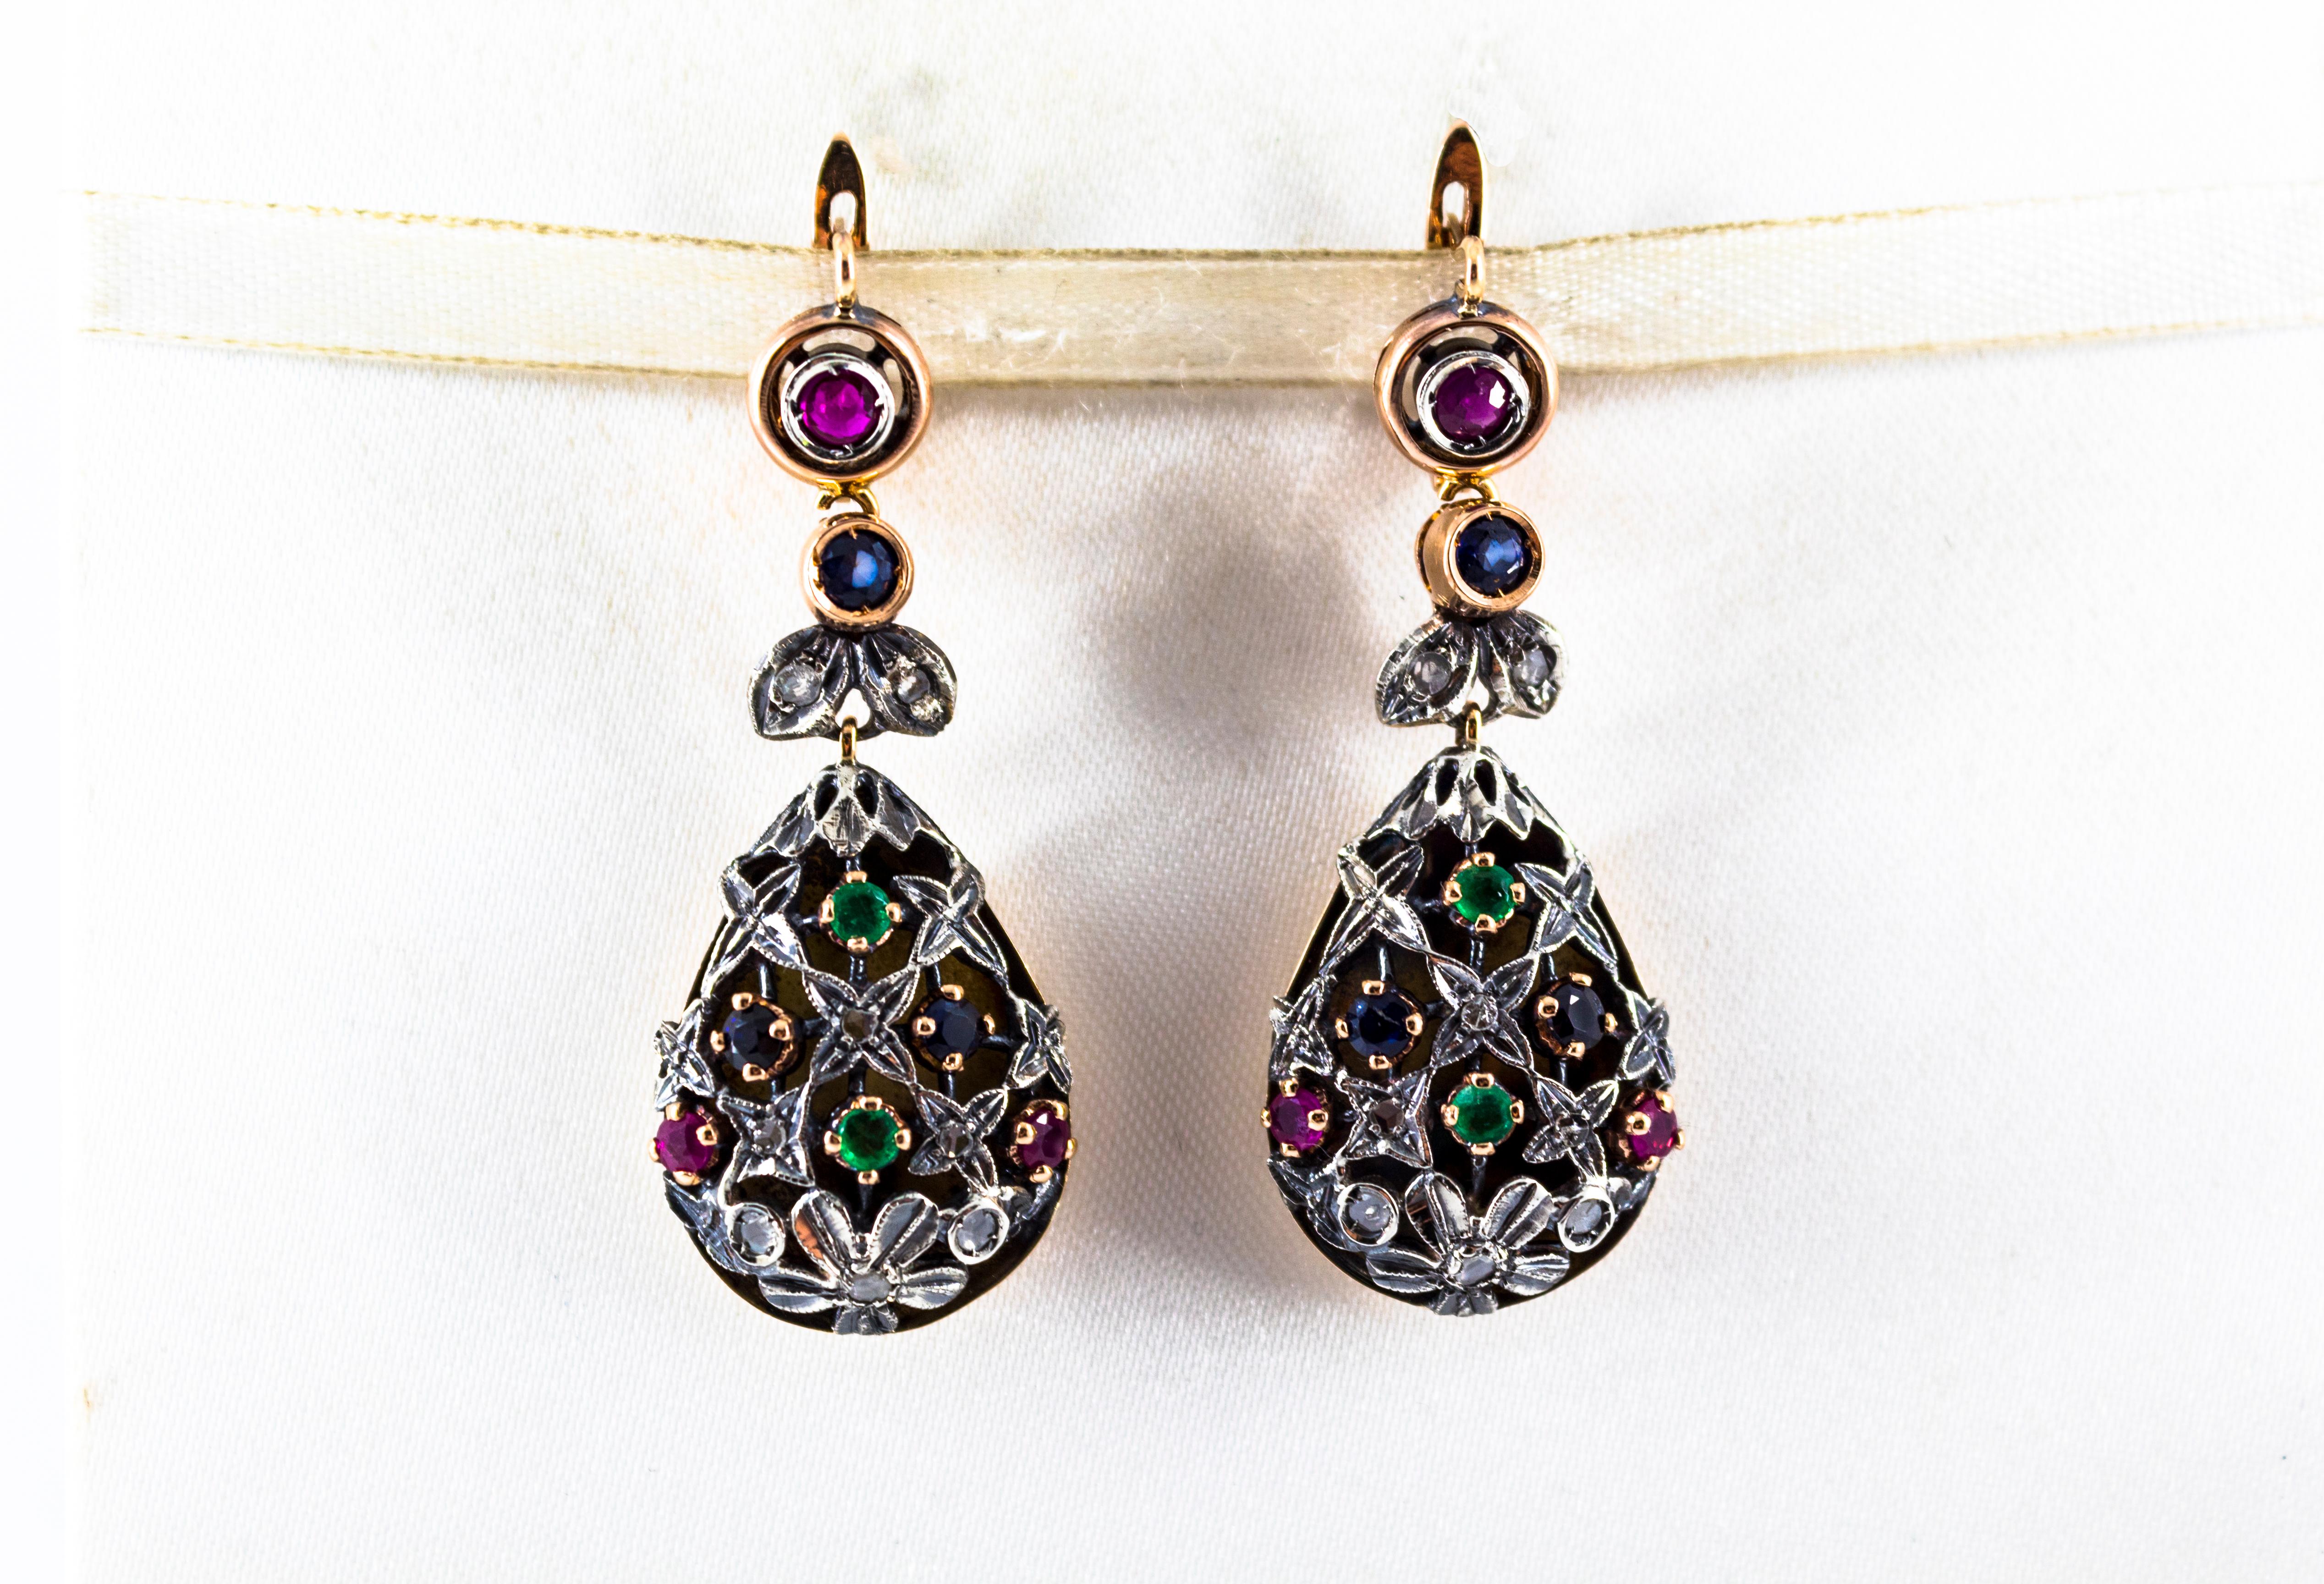 These Earrings are made of 9K Yellow Gold and Sterling Silver.
These Earrings have 0.25 Carats of White Rose Cut Diamonds.
These Earrings have also 1.10 Carats of Rubies, Emeralds and Blue Sapphires.

All our Earrings have pins for pierced ears but